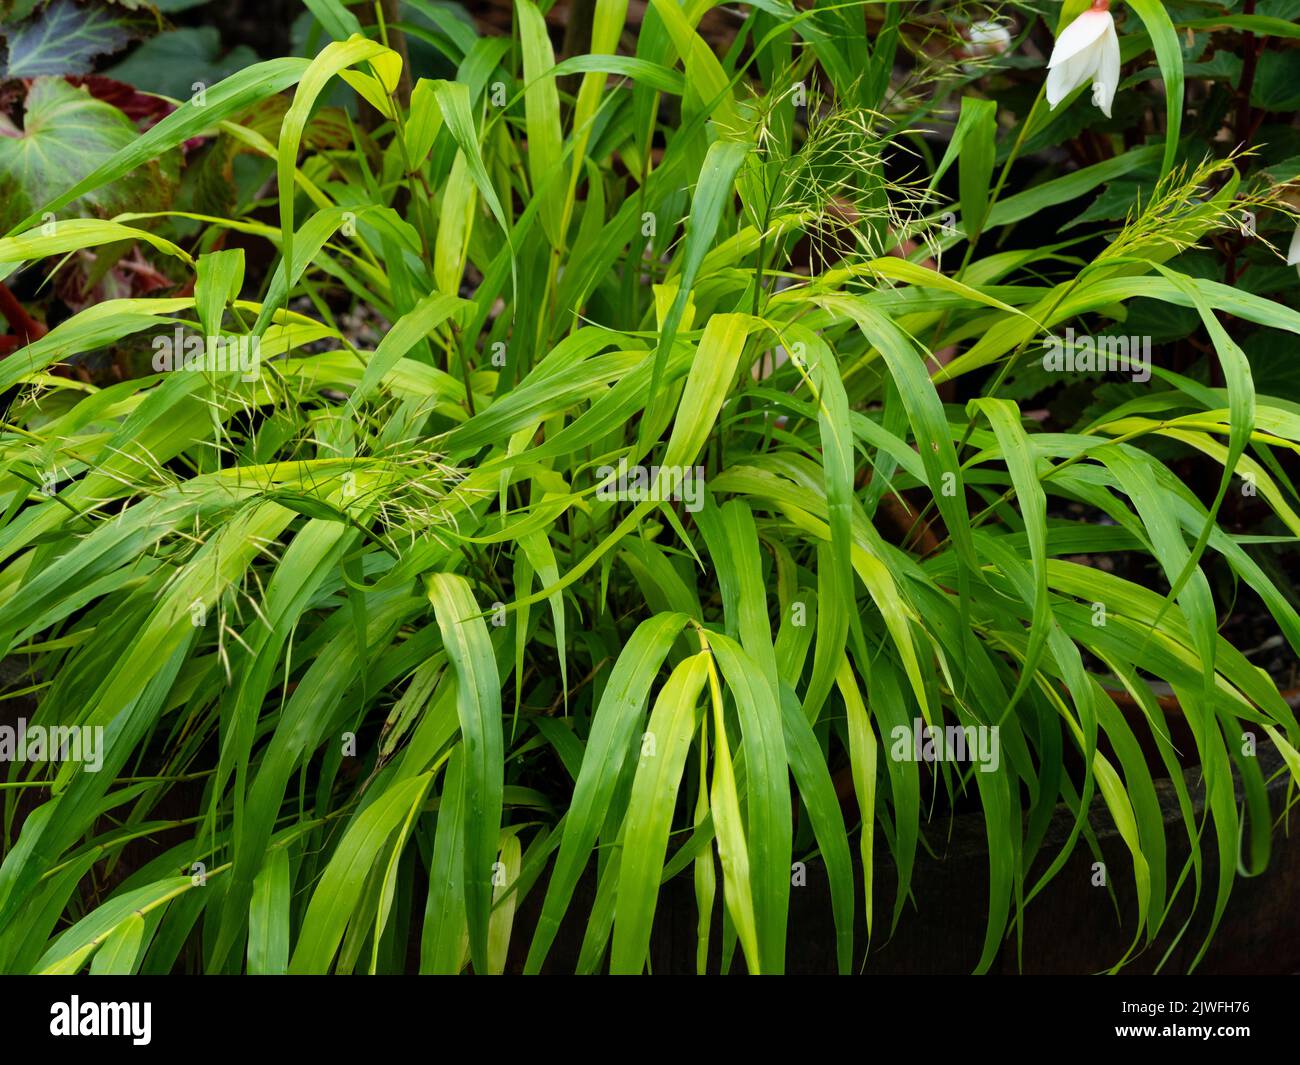 Gold tinged leaves ofthe hardy perennial Japanese forest grass, Hakonechloa macra 'Sunflare' Stock Photo